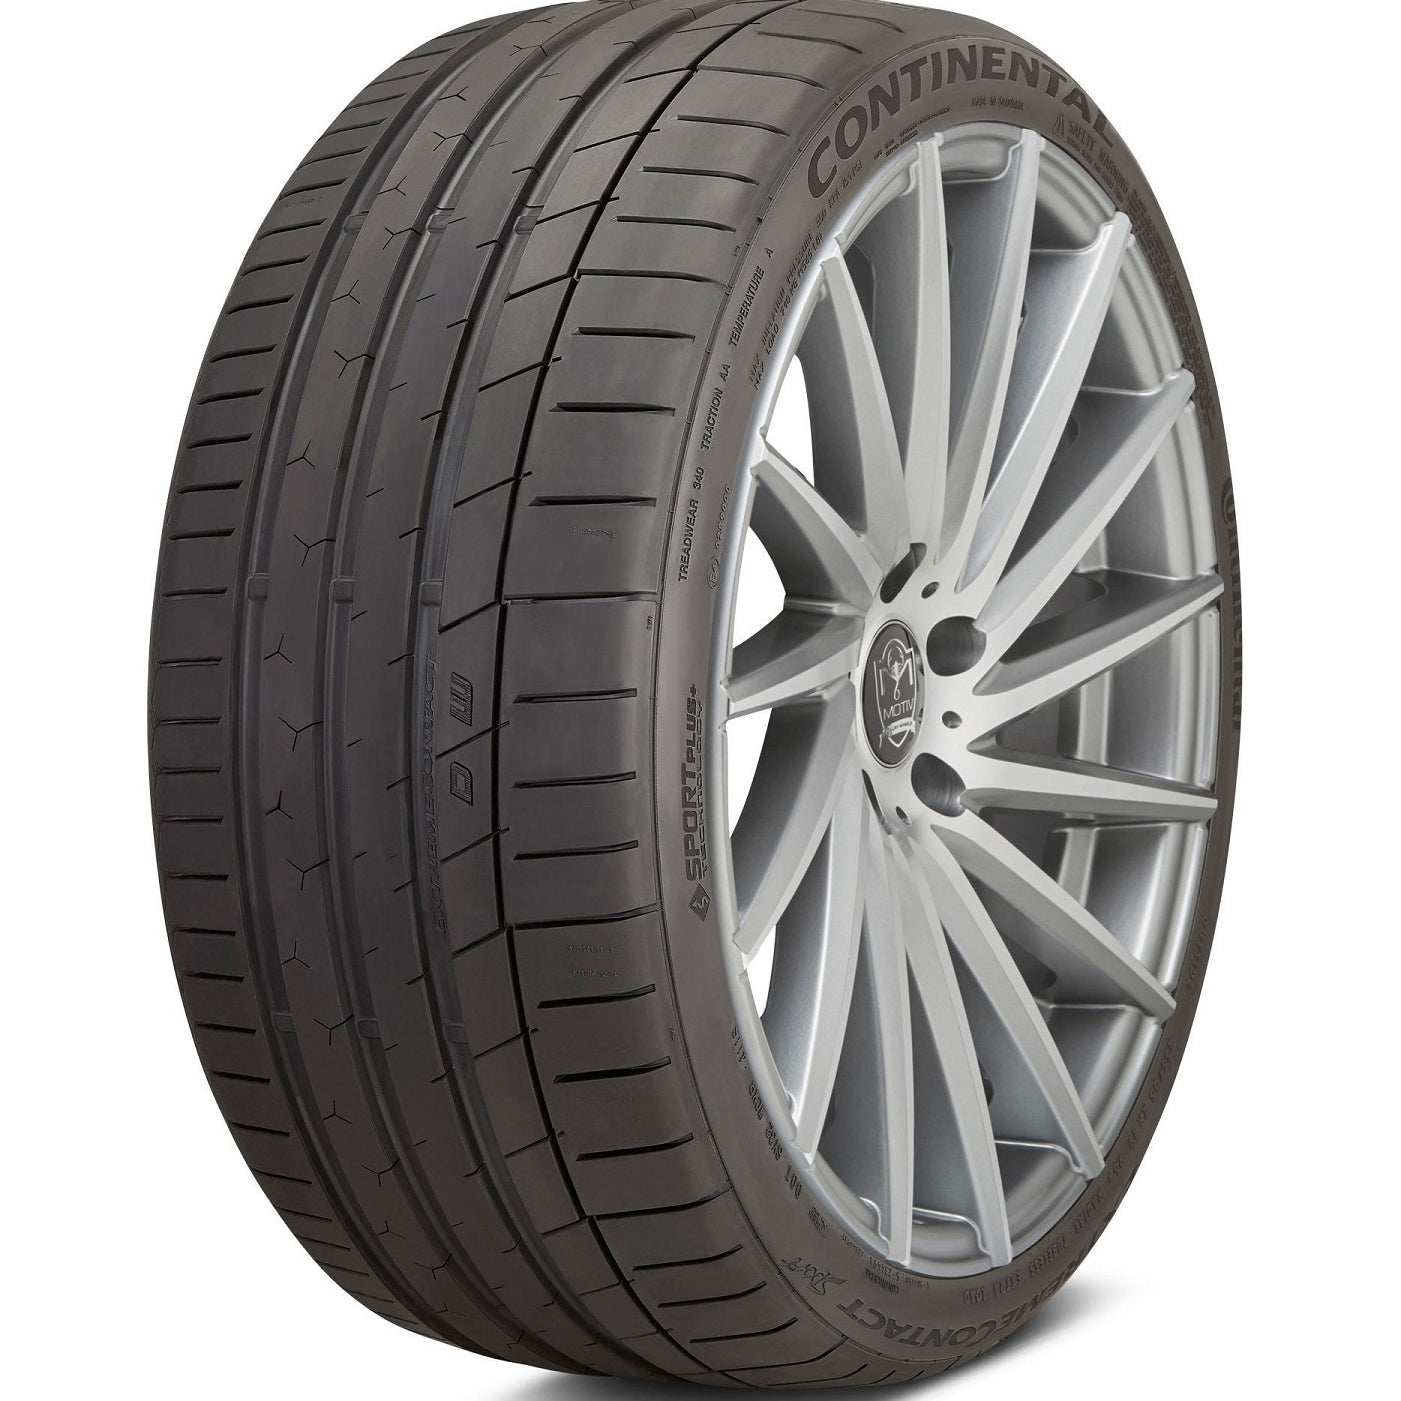 CONTINENTAL EXTREMECONTACT SPORT 305/35ZR20 (28.4X12R 20) Tires